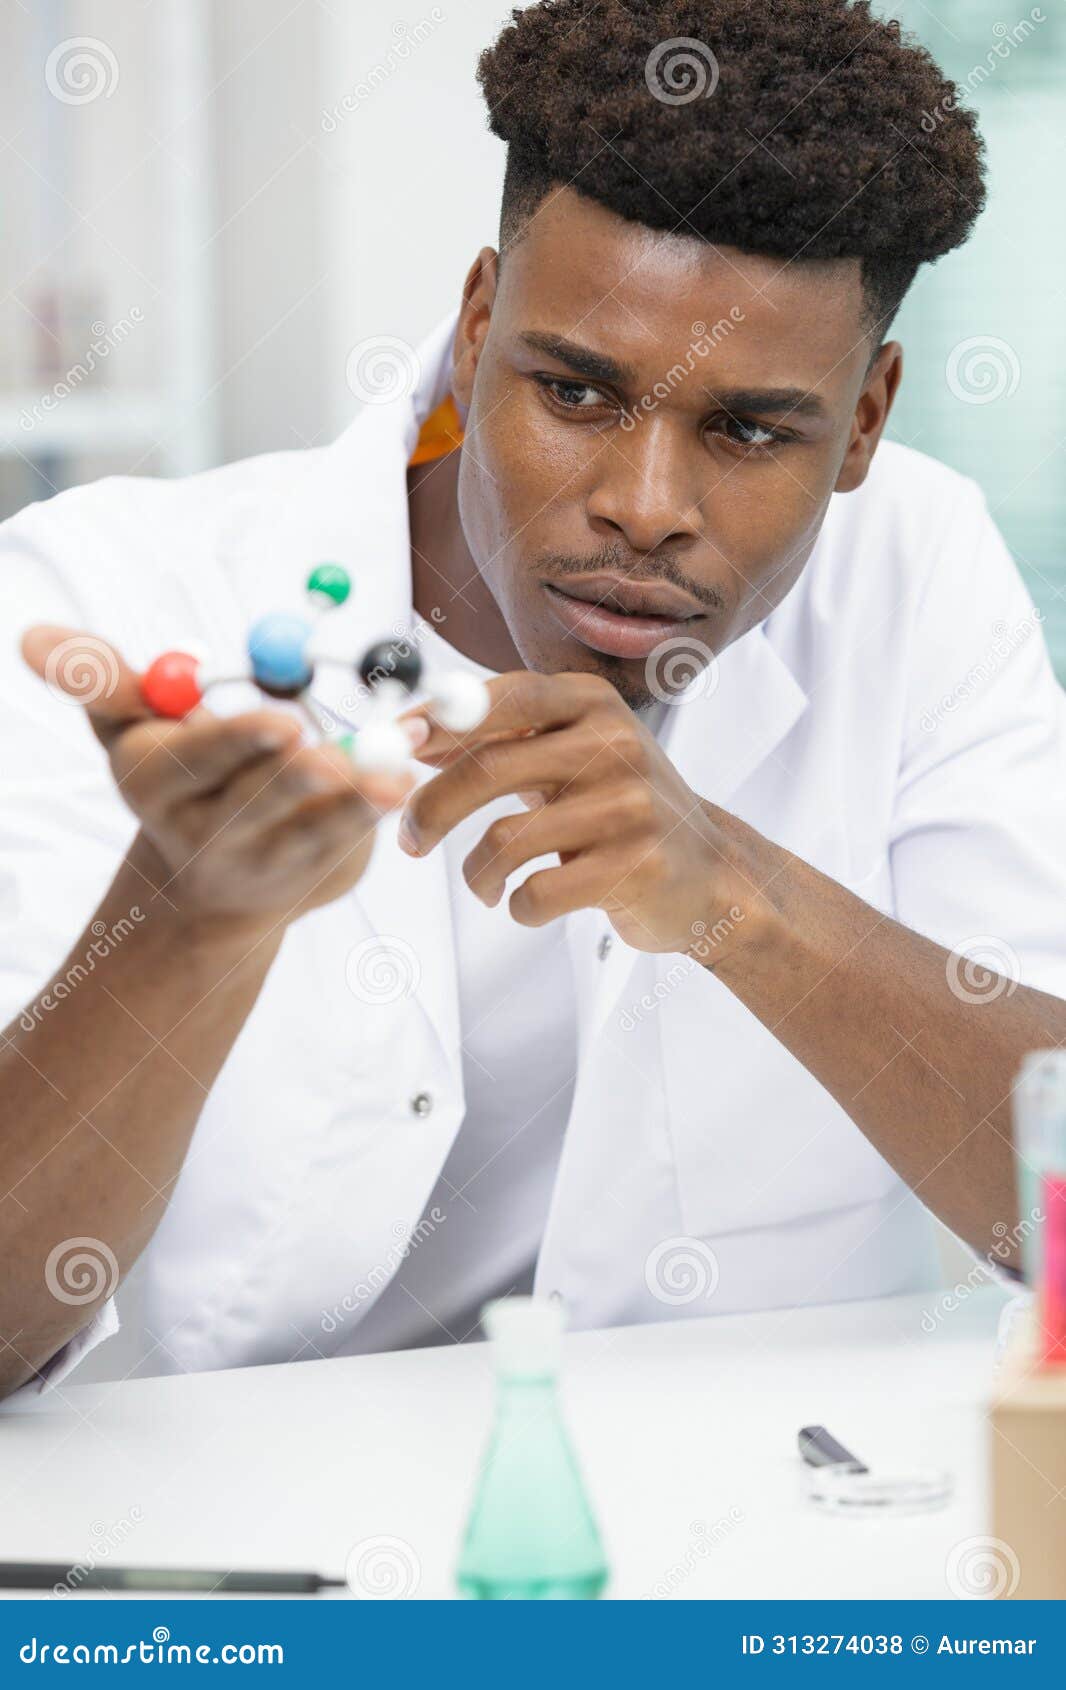 male scientist with molecules model